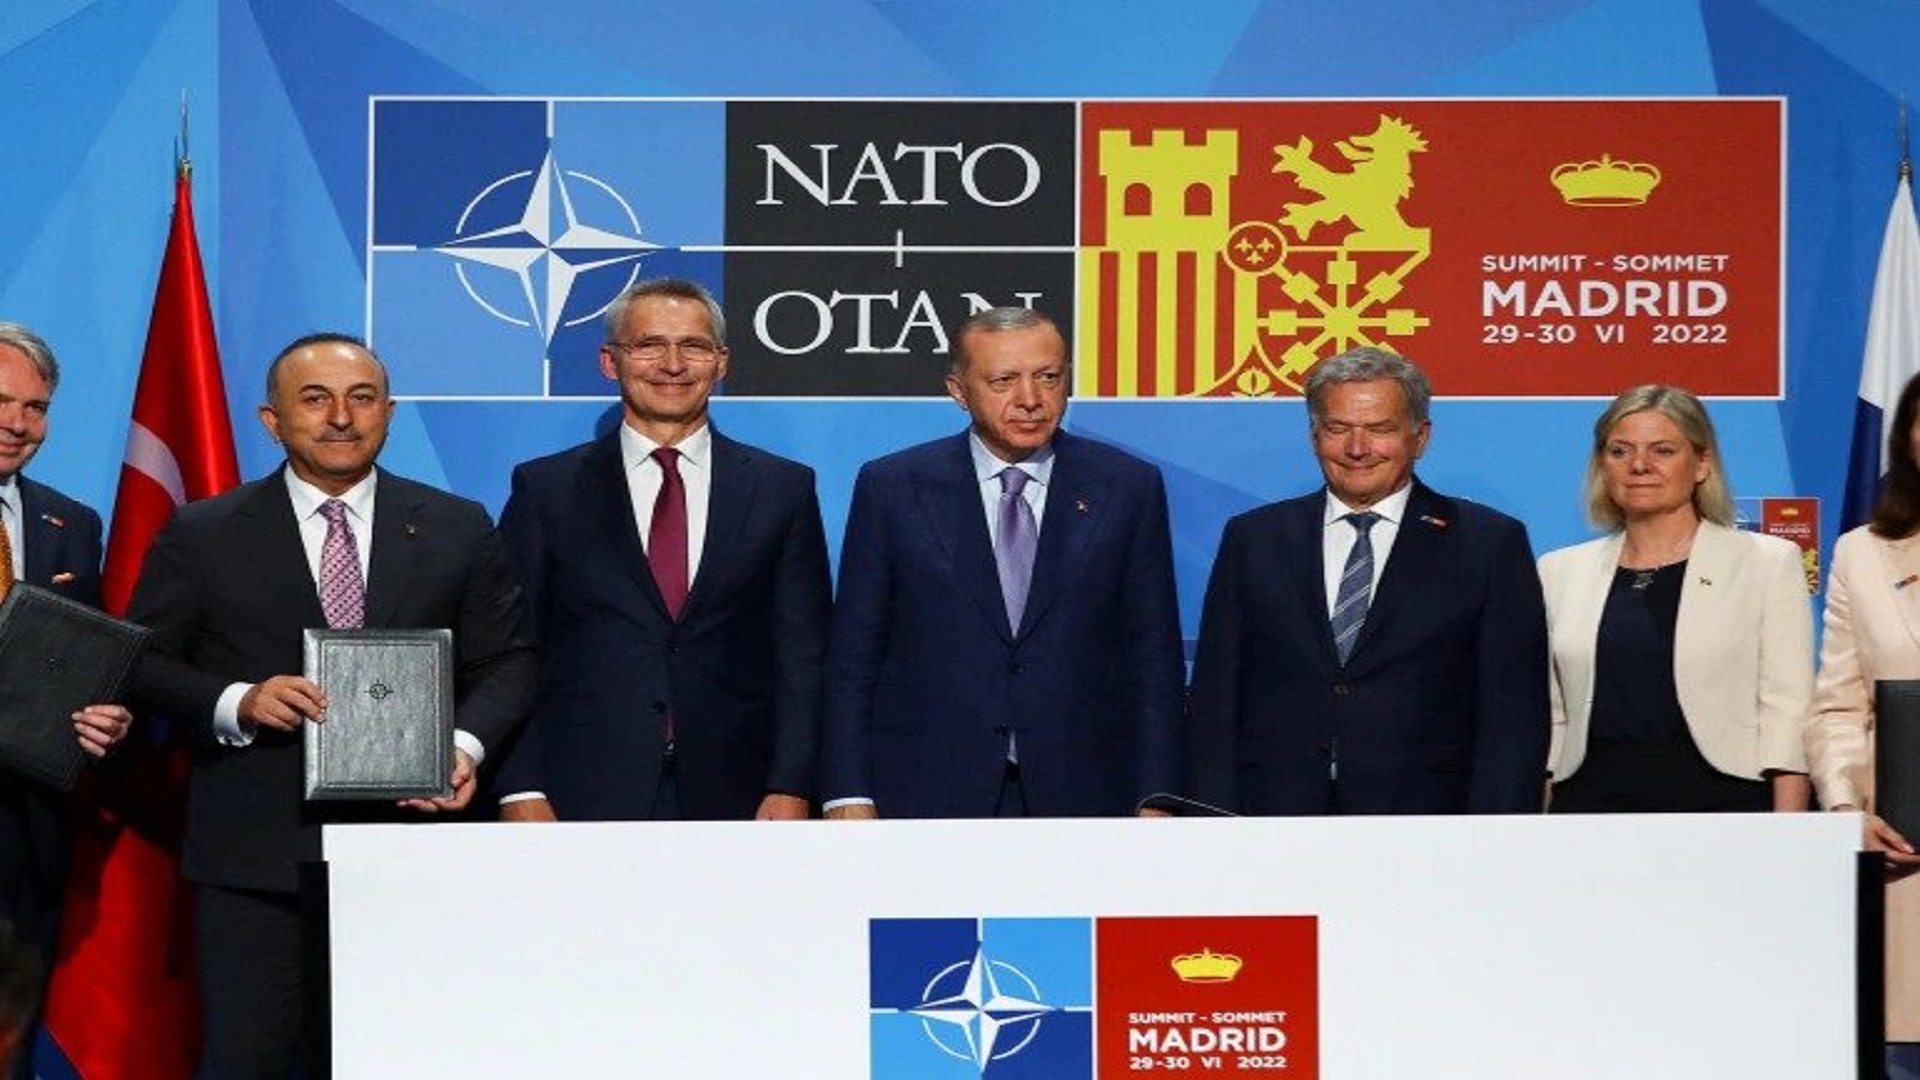  Turkish President Recep Tayyip Erdogan, Finland's President Sauli Niinisto, Sweden's Prime Minister Magdalena Andersson and NATO Secretary-General Jens Stoltenberg deliver a statement during a NATO summit in Madrid, Spain on June 28, 2022 [Violeta S